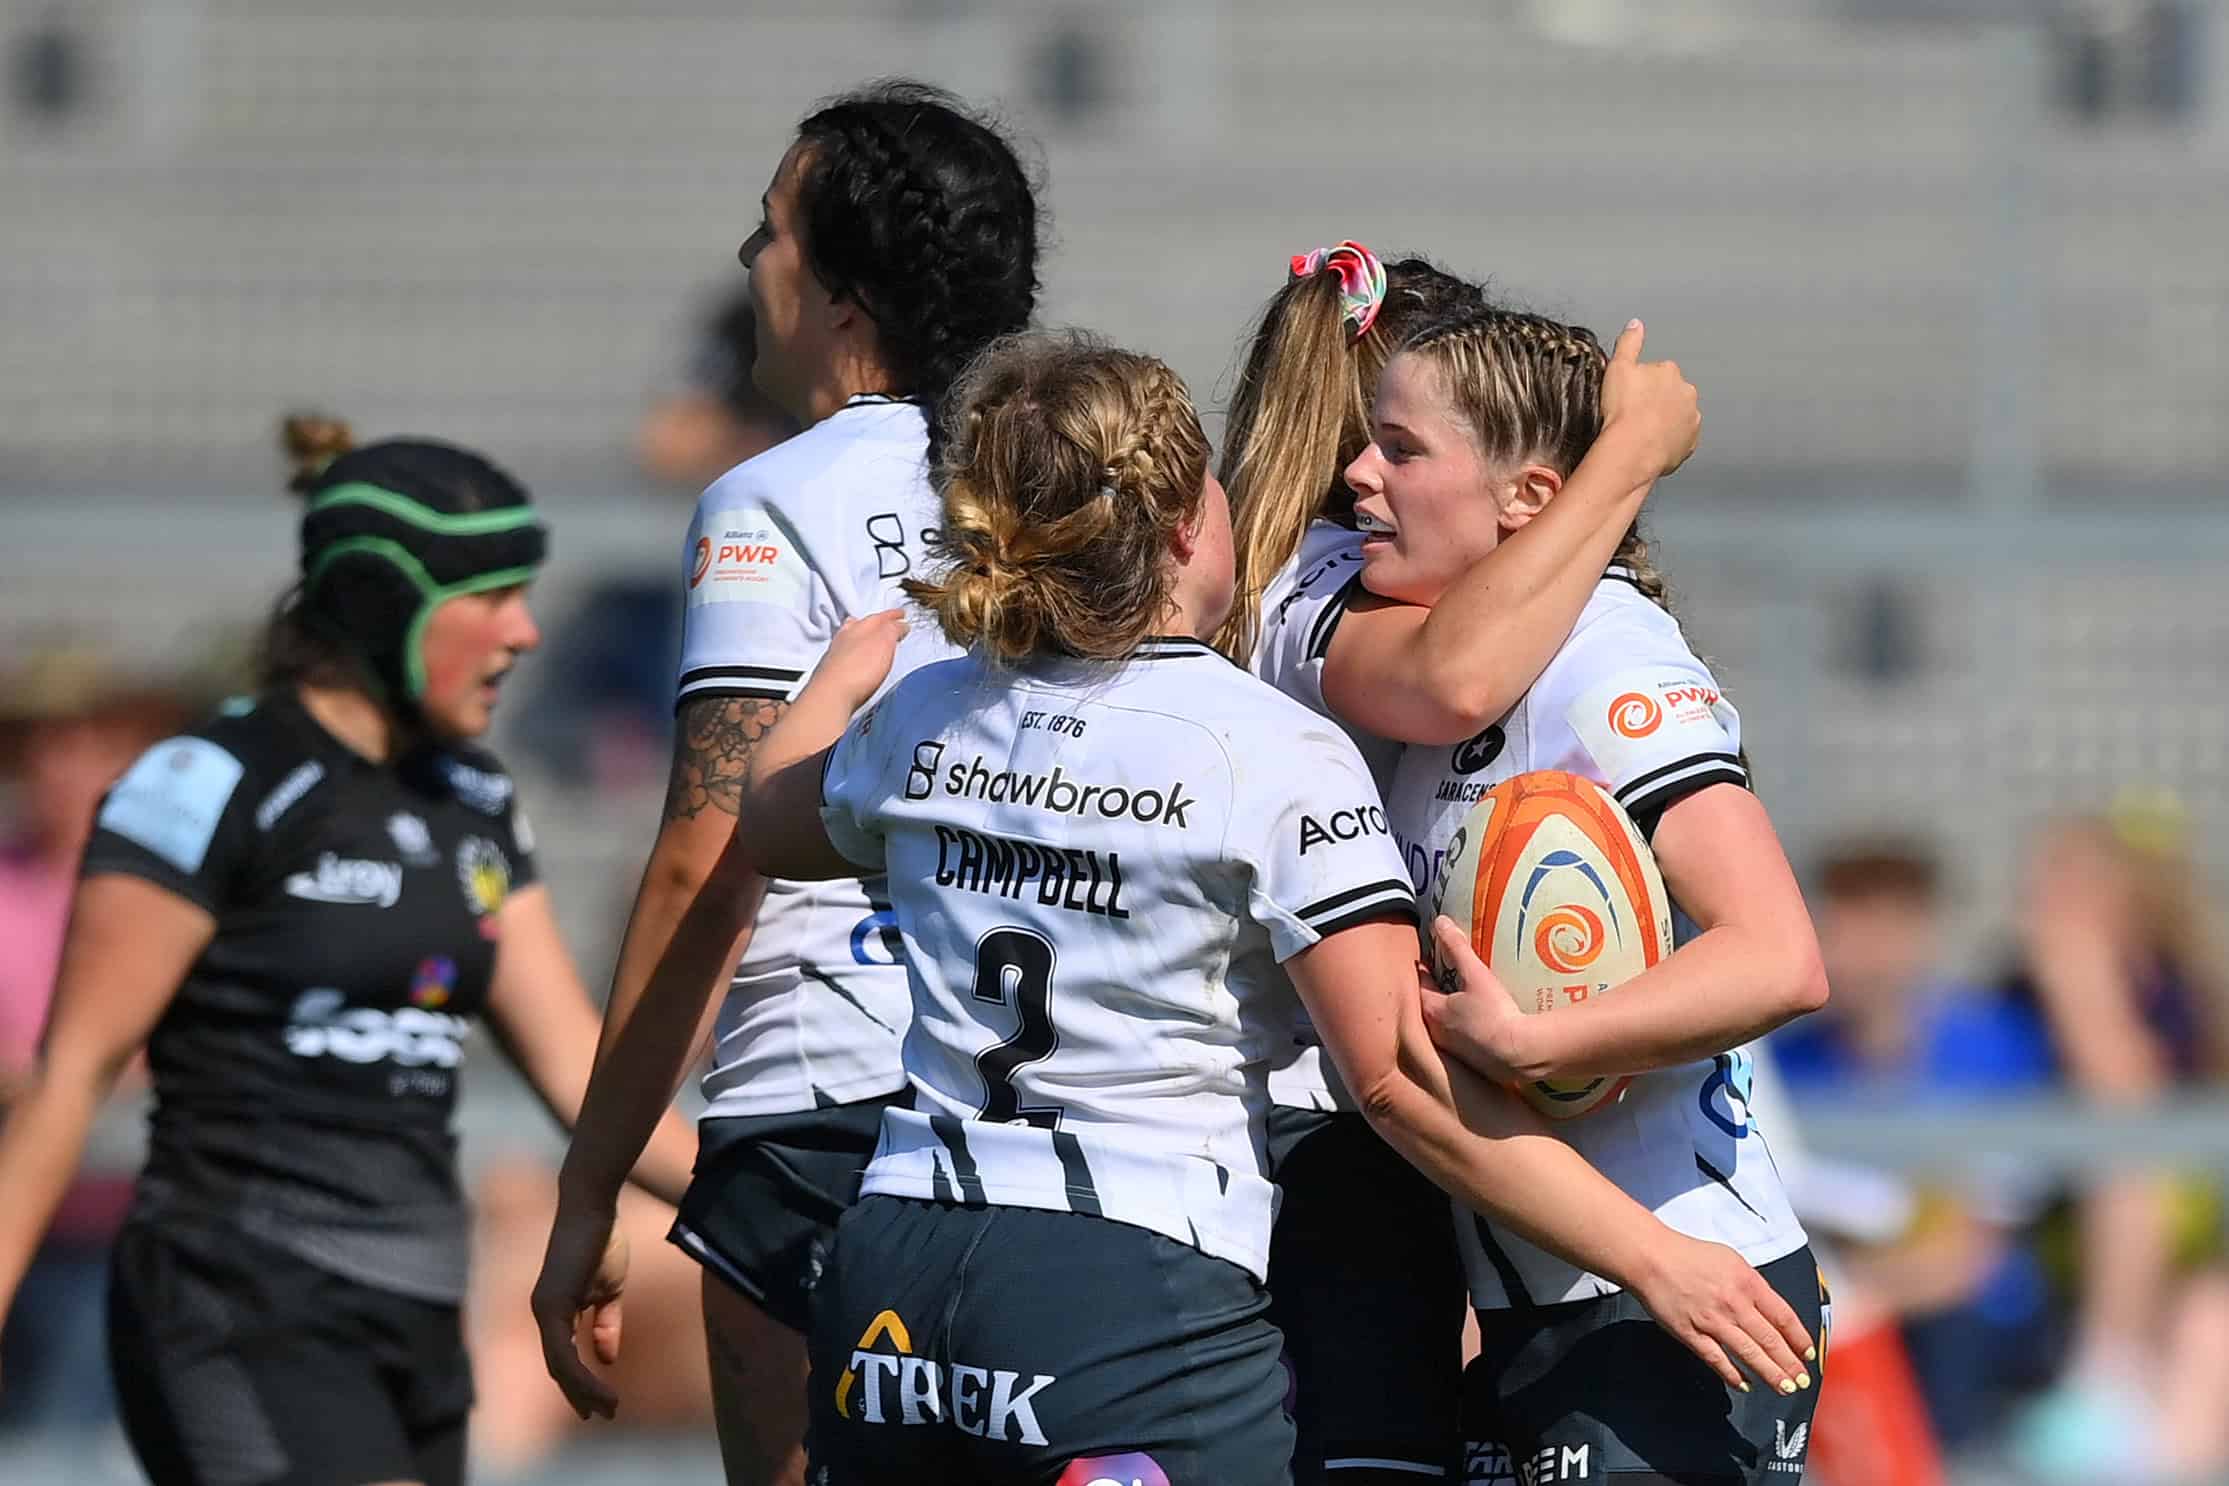 Exeter Chiefs V Saracens Allianz Premiership Women's Rugby